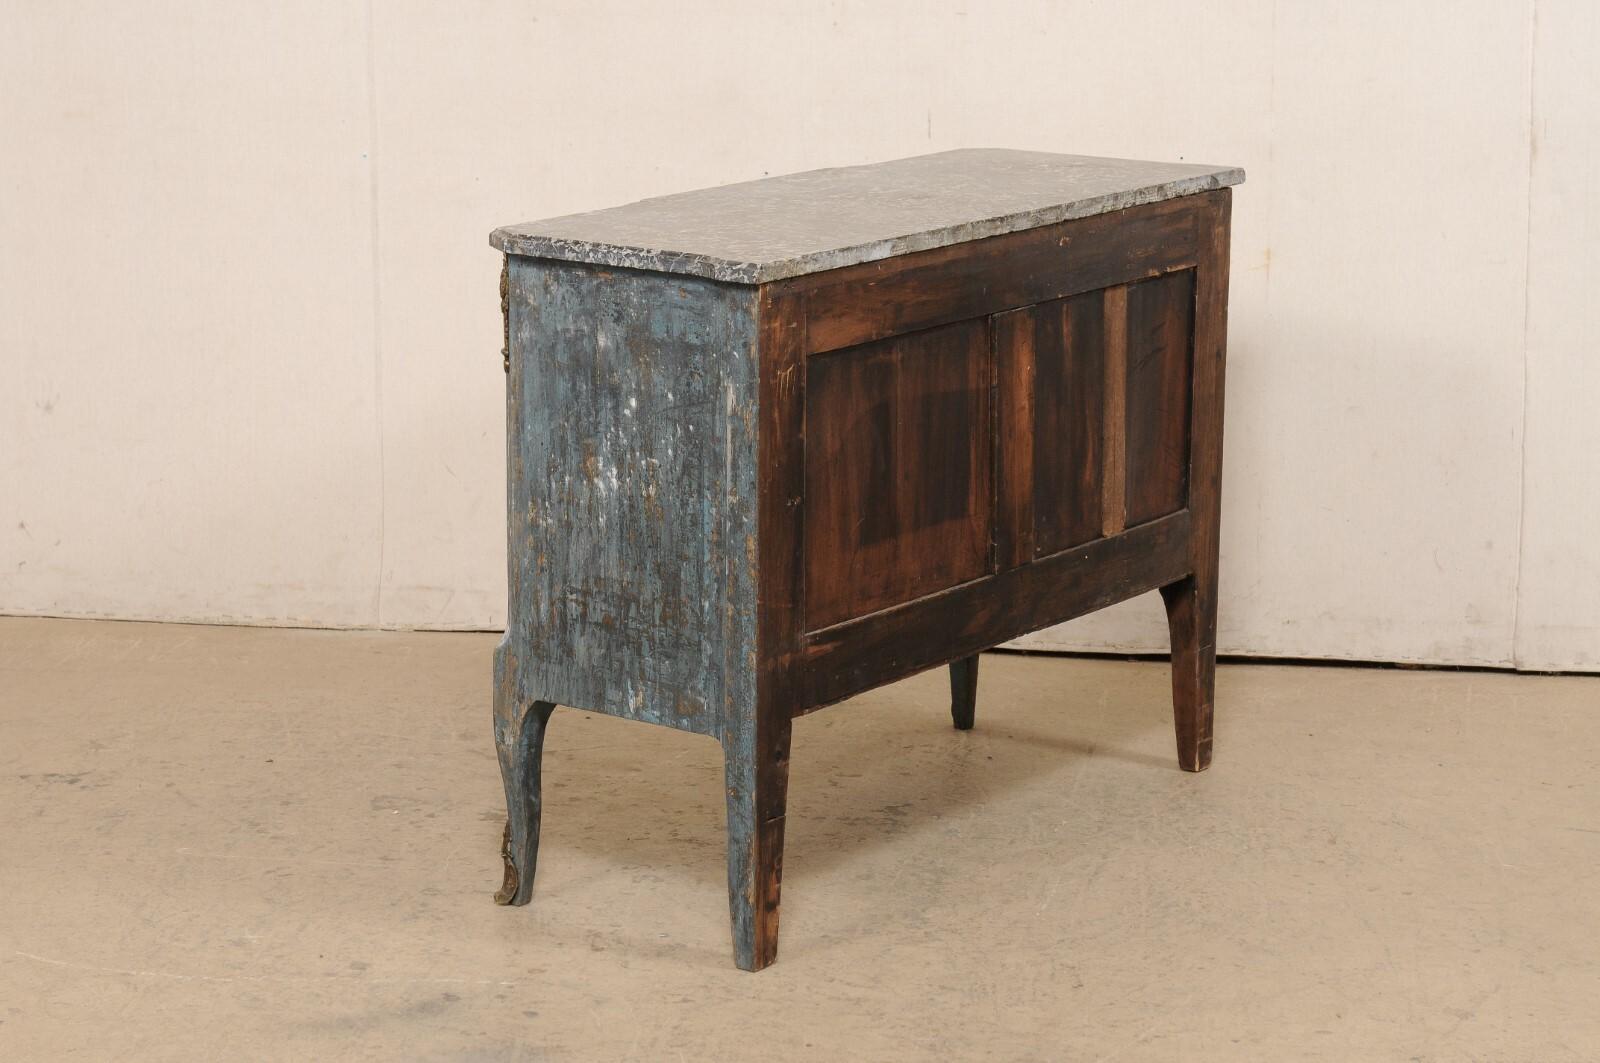 Antique French Neoclassical Style Commode w/Black Marble Top & Scraped Finish For Sale 7